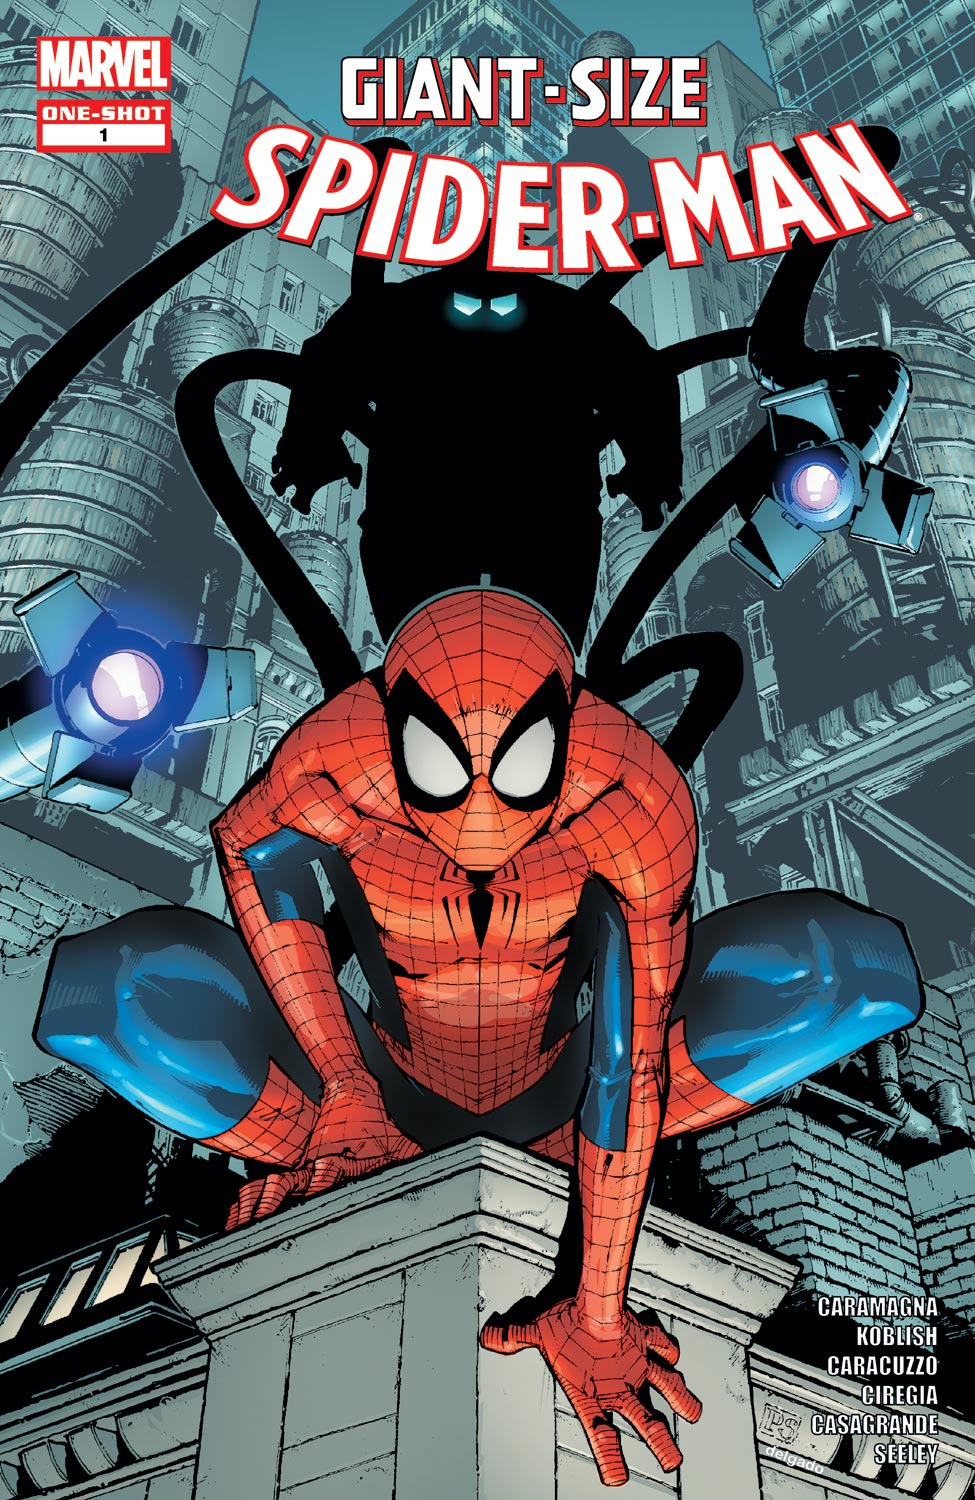 Giant-Size Spider-Man (2014) #1 | Comic Issues | Marvel